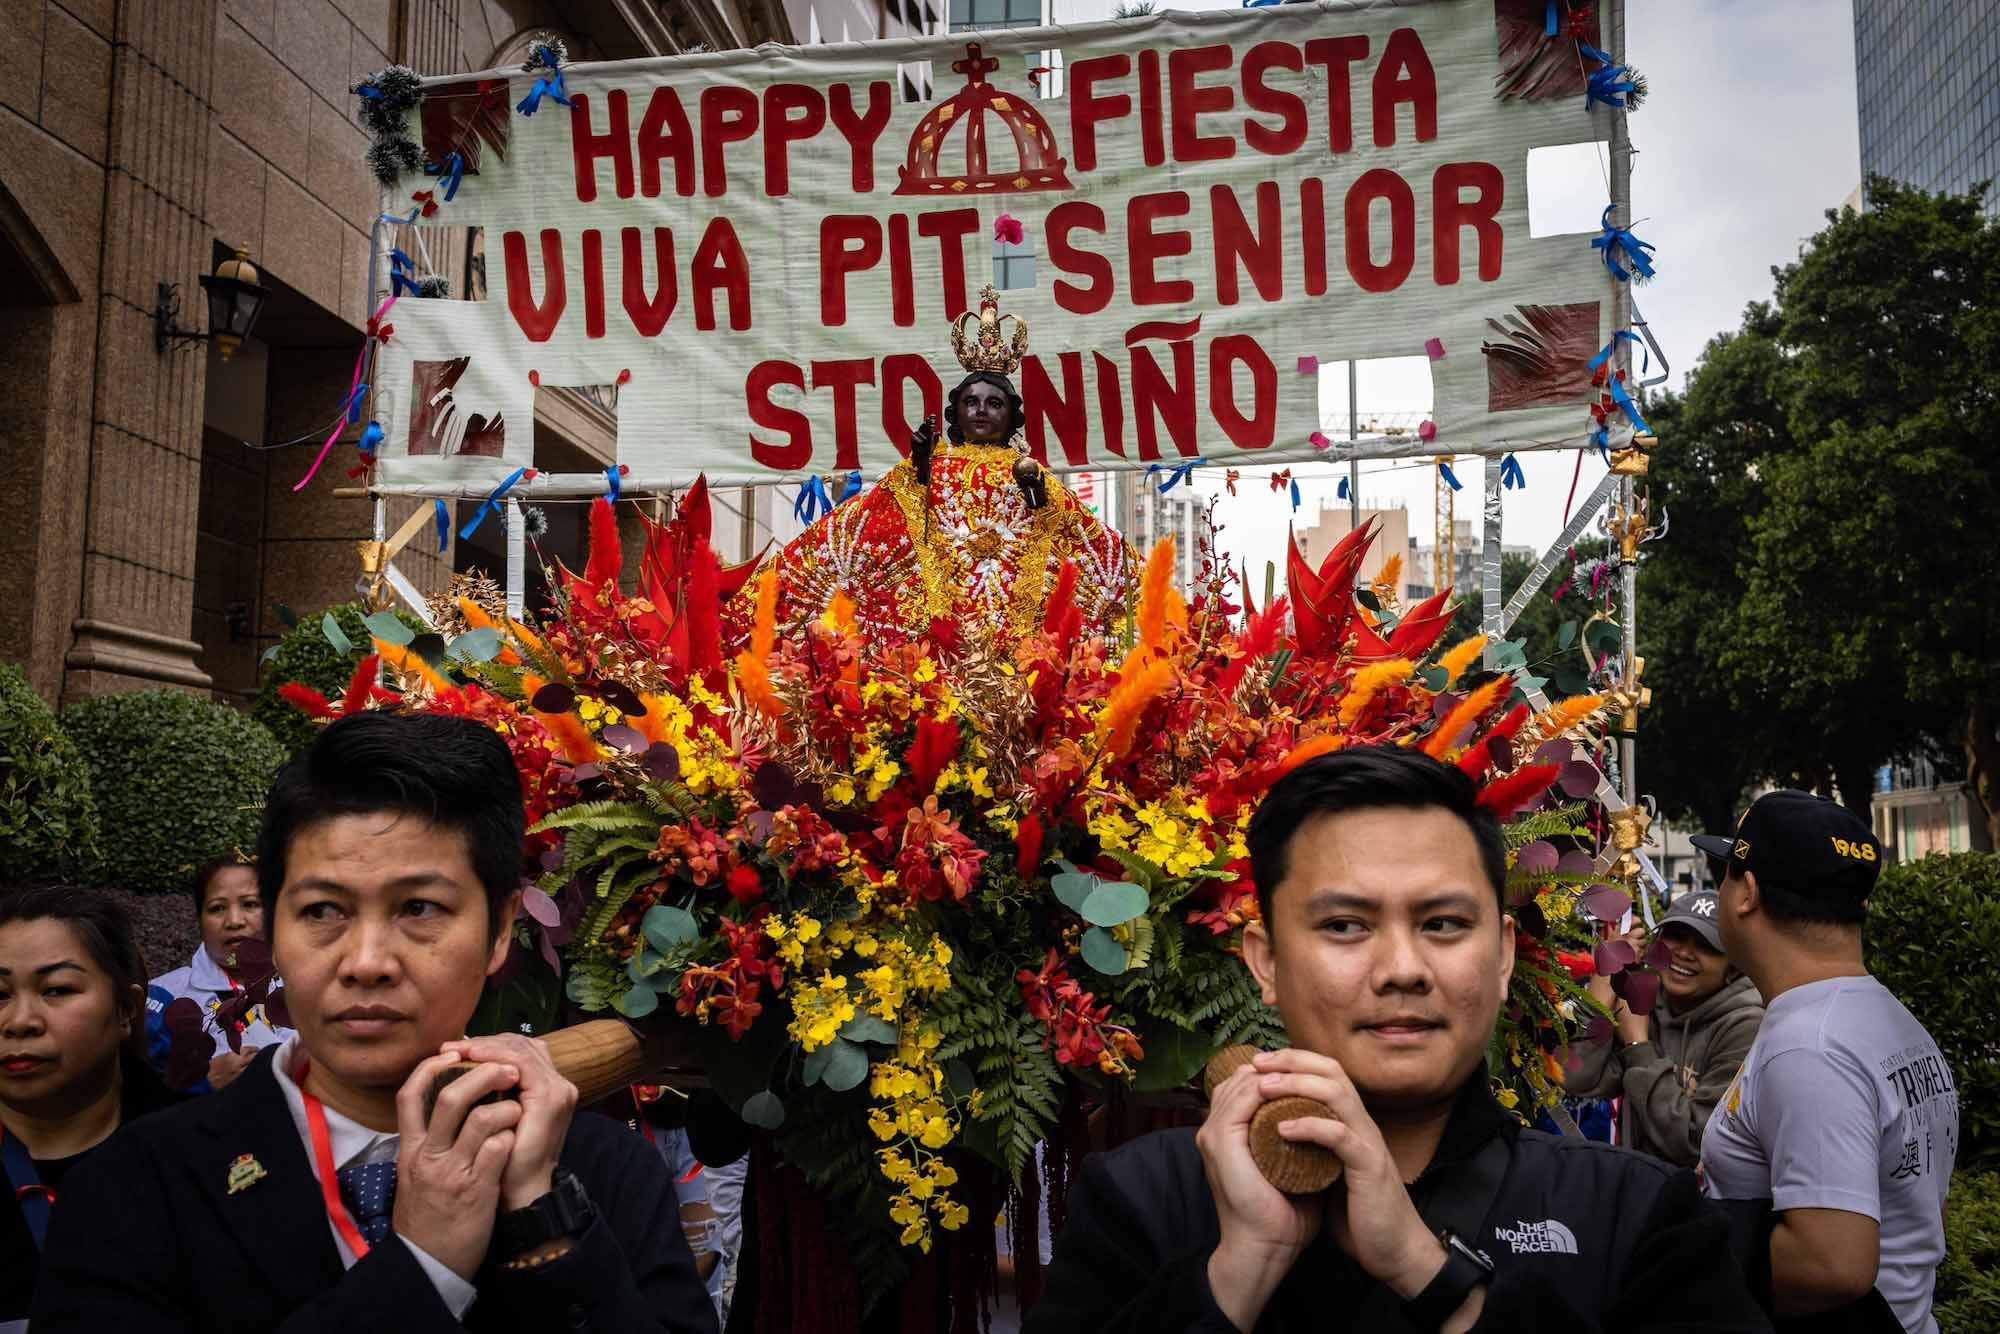 Two members of the Sinulog Festival’s organising committee help carry a litter with a figure of the Infant Jesus through the streets of Macao